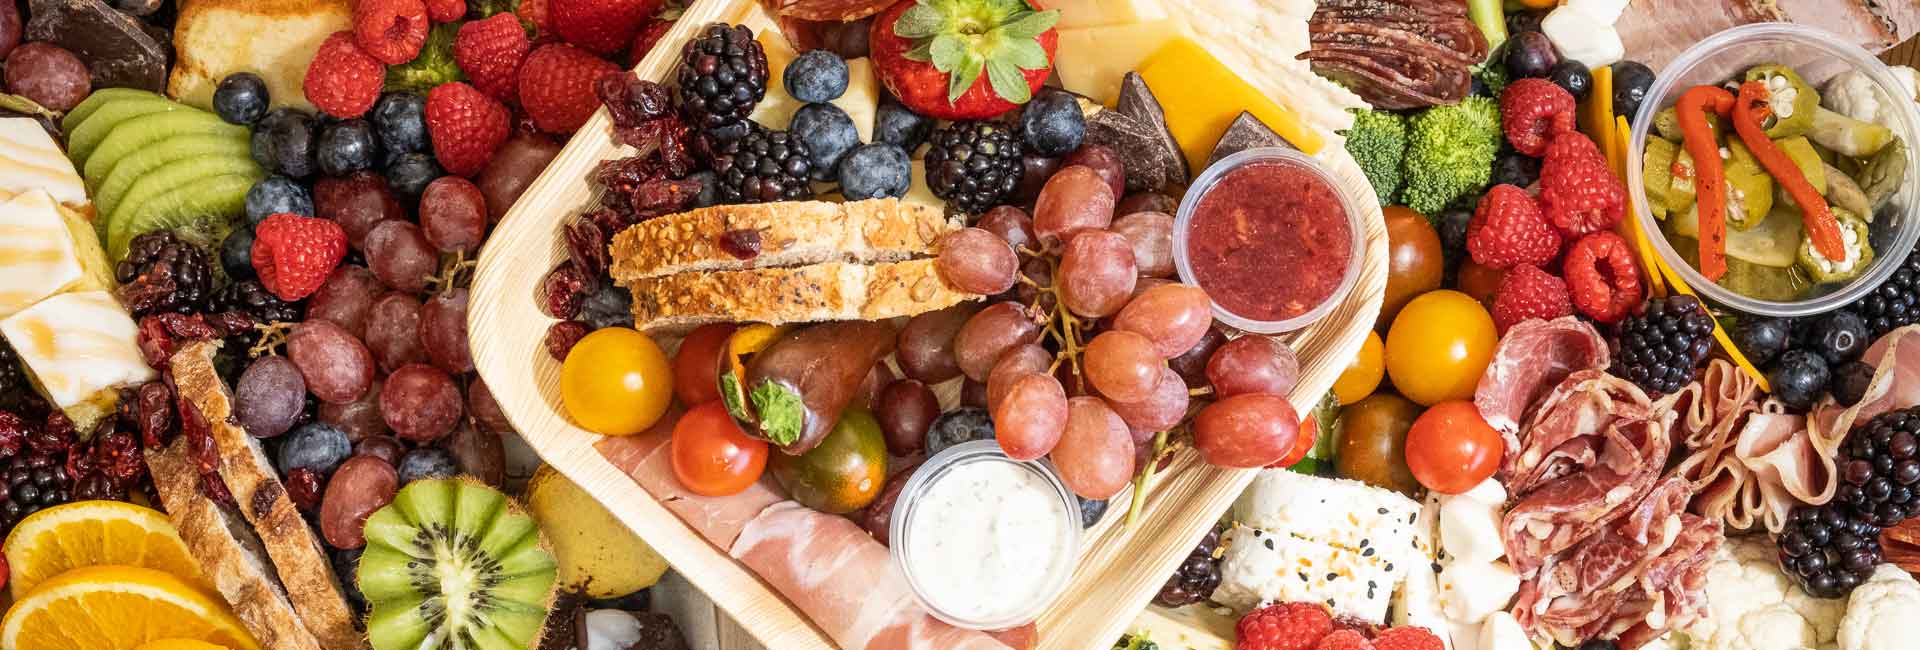 Graze Craze charcuterie boards and boxes coming to Midtown Crossing